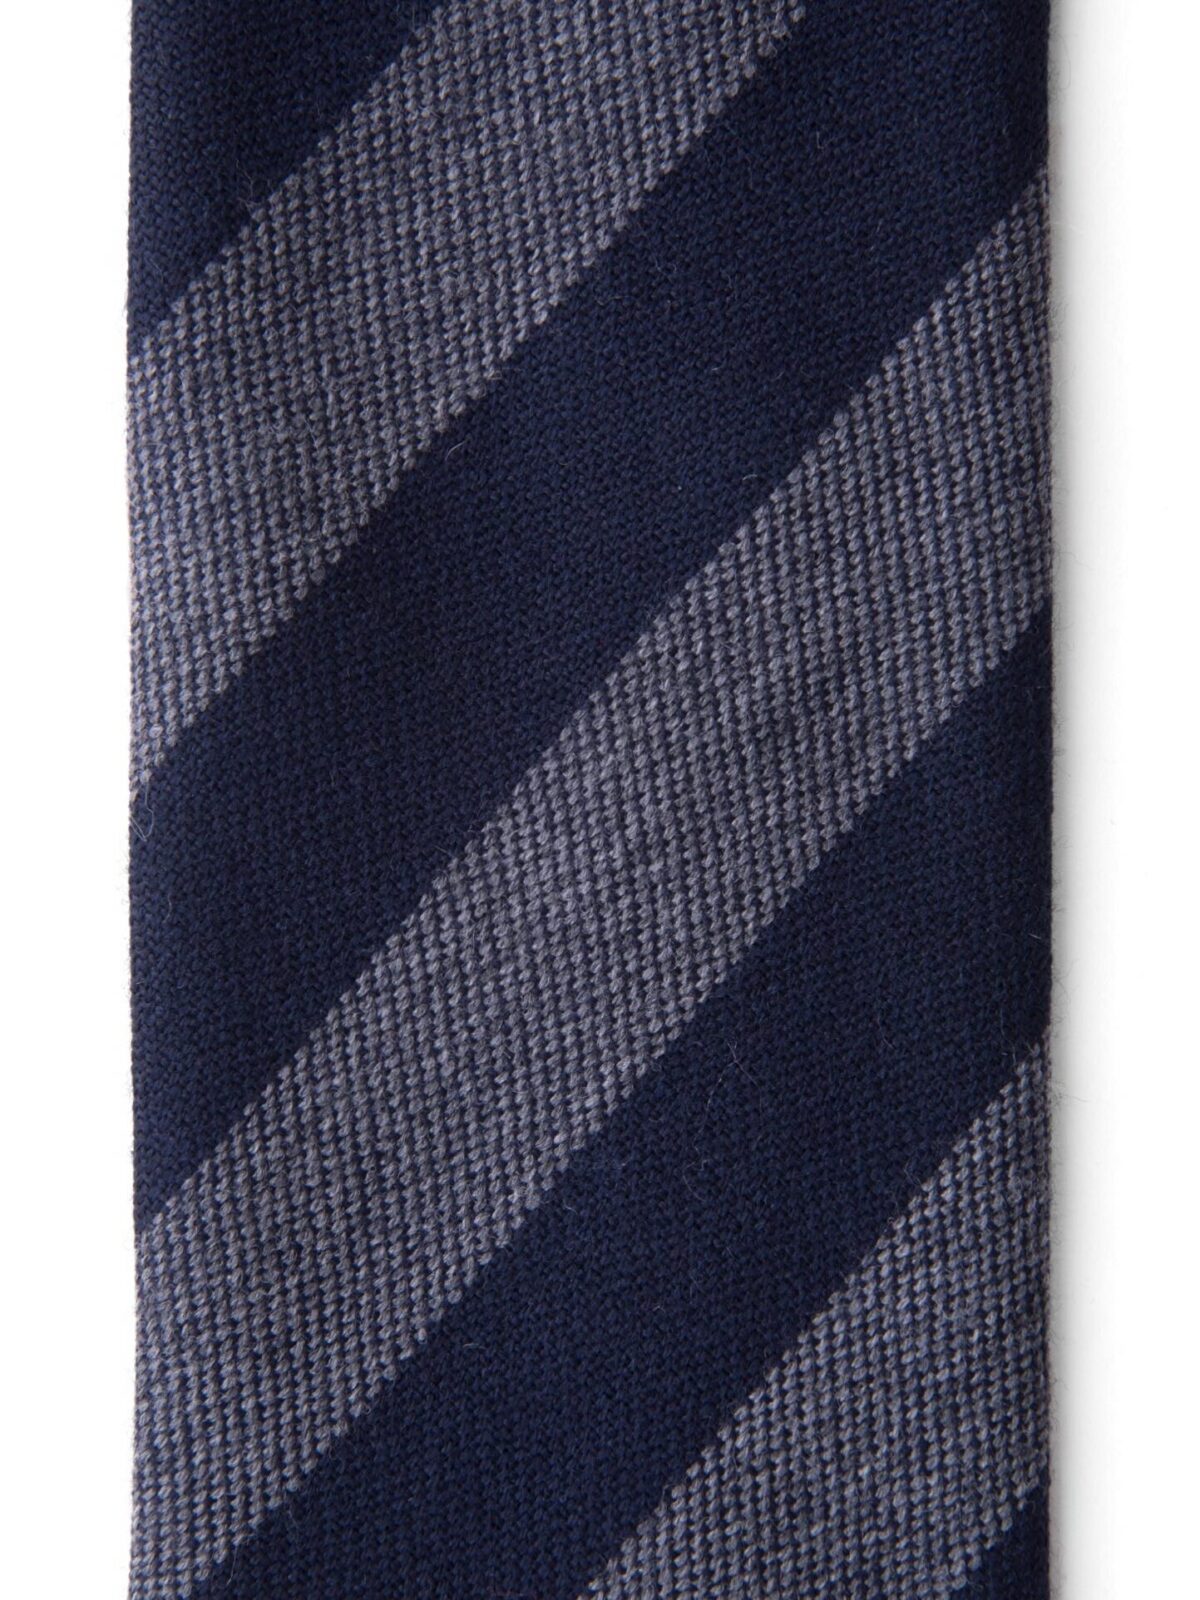 Navy and Grey Wool Striped Tie